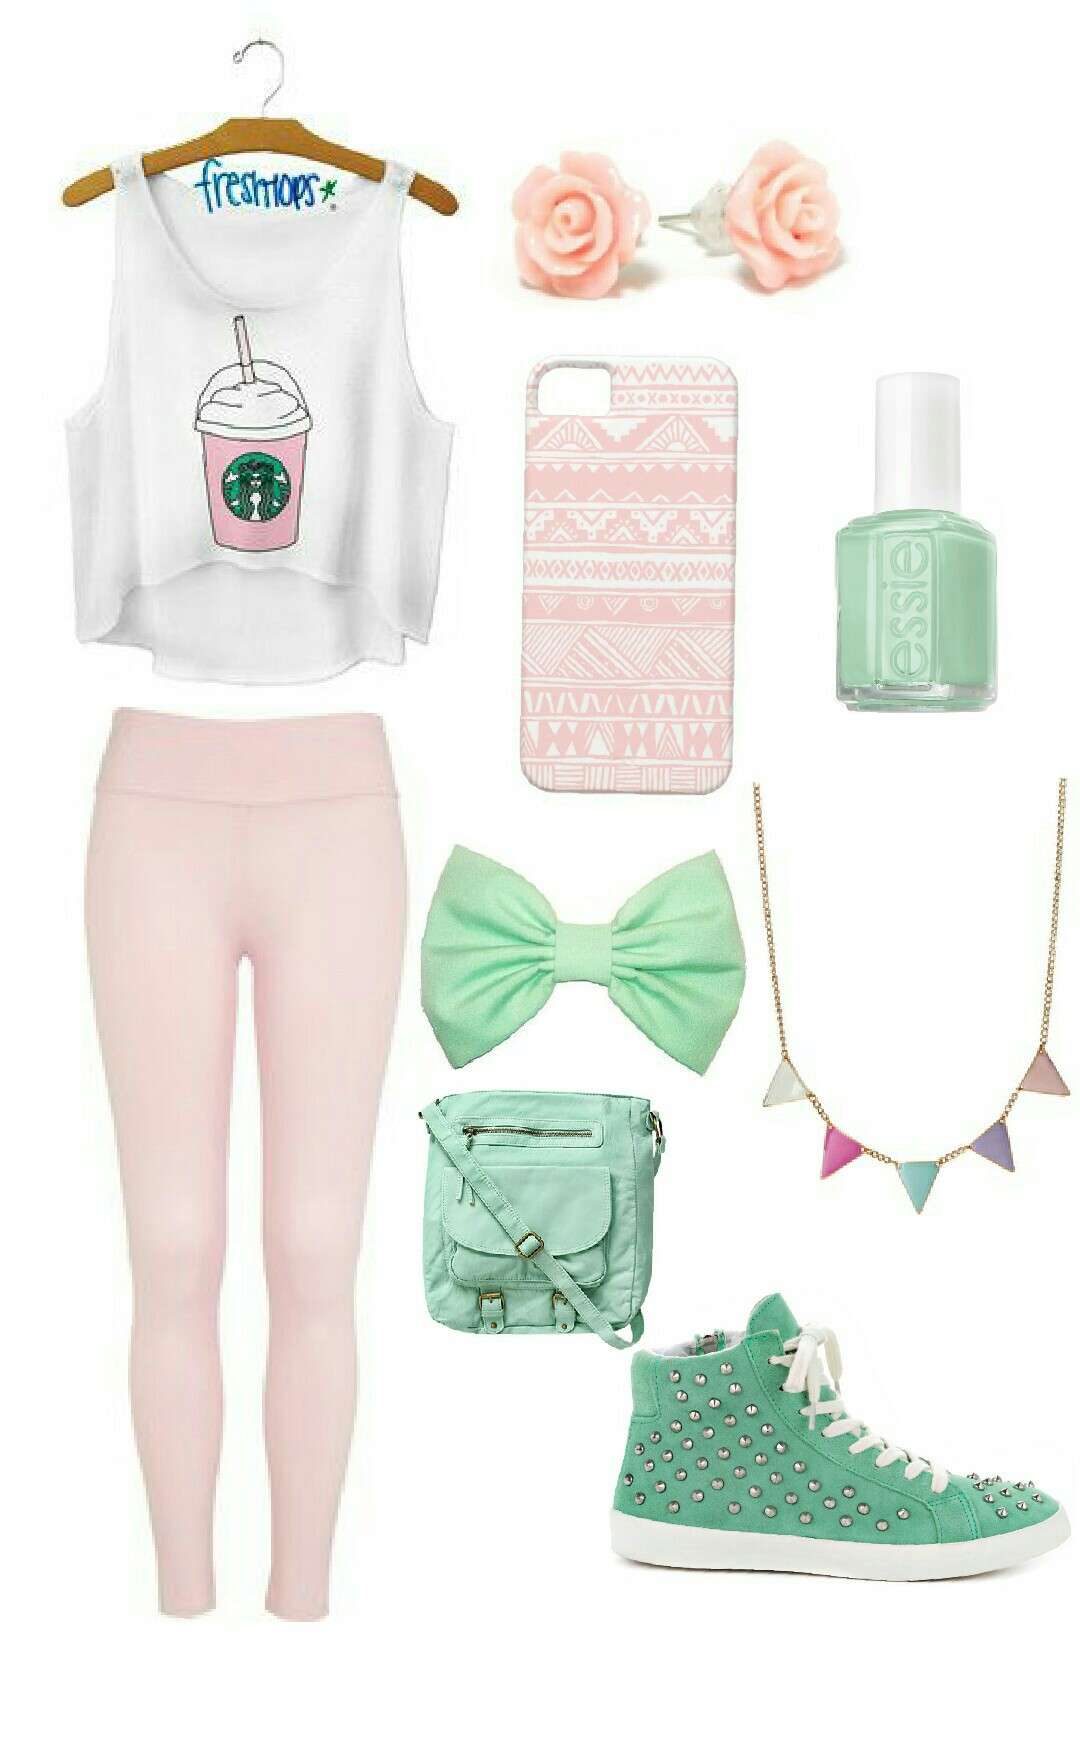 Starbucks/Pastel Outfit 💚💜💛💙✌